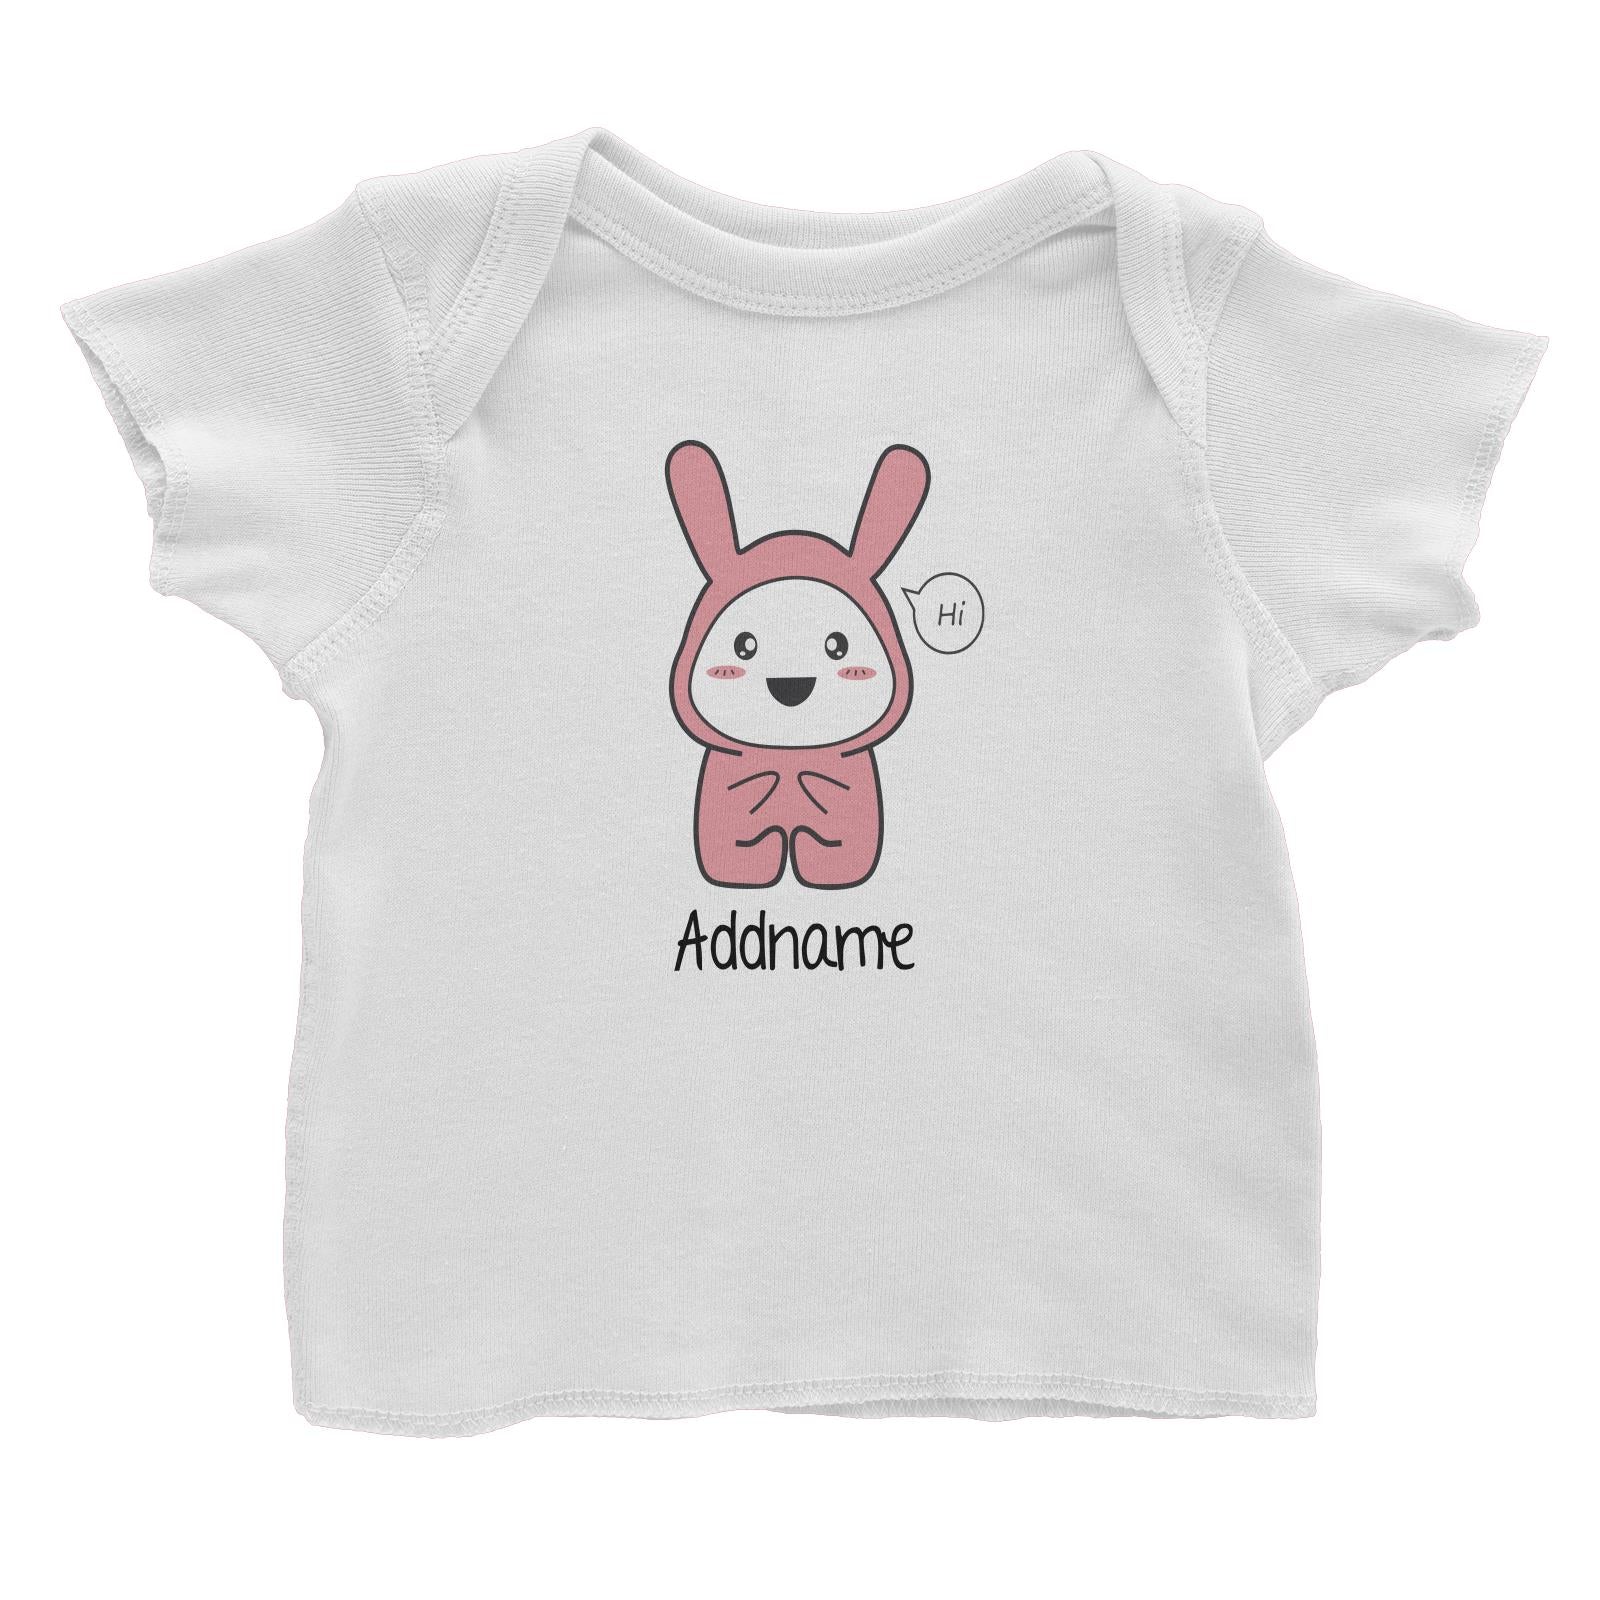 Cute Hamster in Rabbit Suit Baby Addname Baby T-Shirt